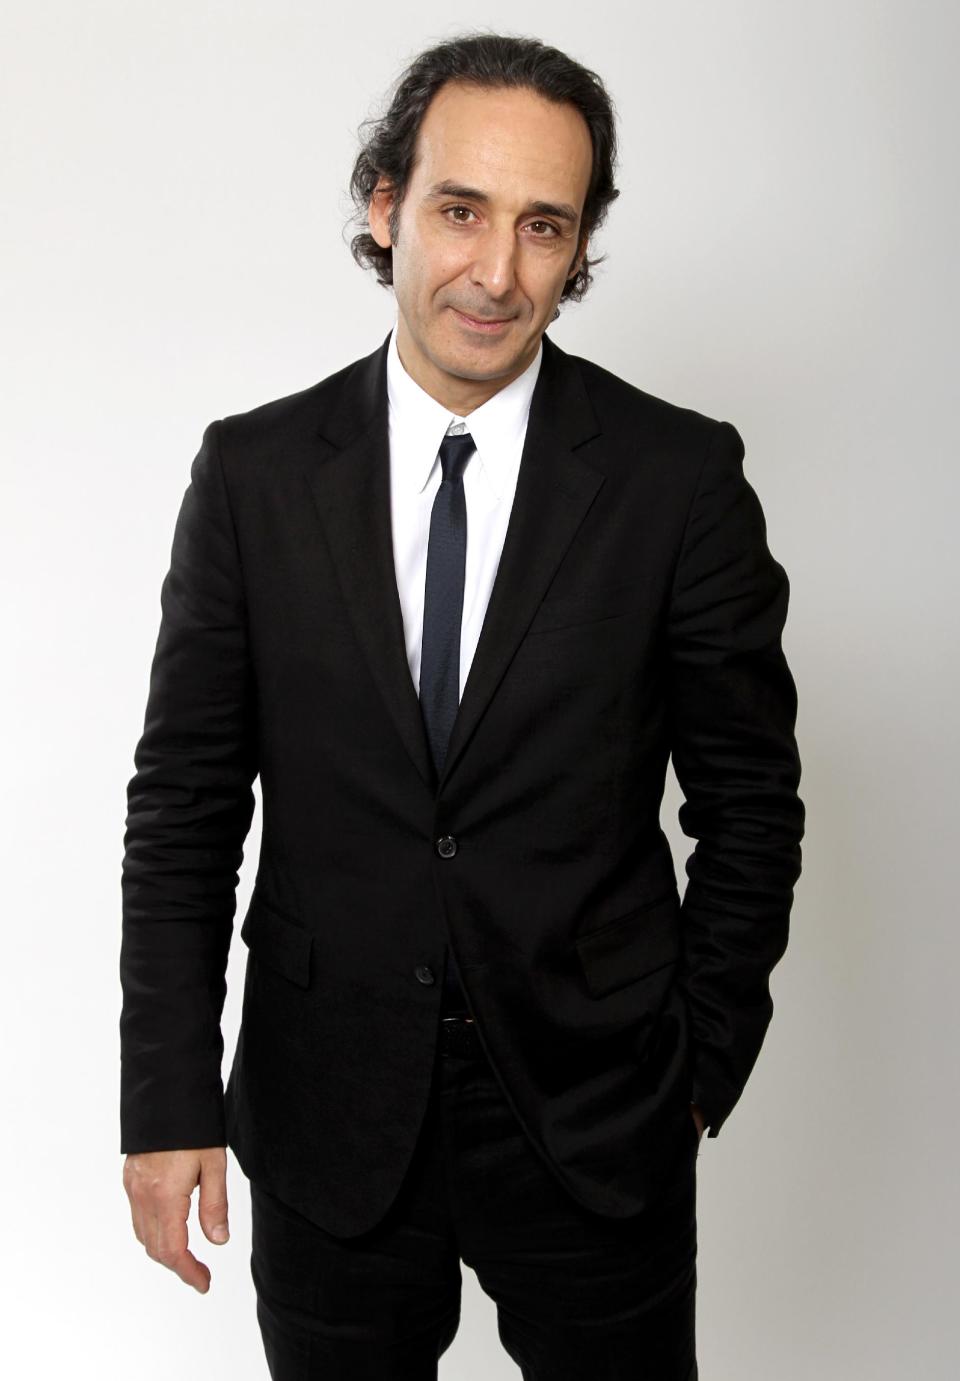 FILE - In this Feb. 4, 2013 file photo, Oscar nominee Alexandre Desplat poses for a portrait at the 2013 Oscar Nominee Luncheon, in Los Angeles. The Academy of Motion Picture Arts and Sciences will present a live Oscar Concert celebrating the year’s nominated scores and songs on Thursday, Feb. 27, 2014, at UCLA's Royce Hall in Los Angeles. The program features an orchestra performing suites from each of the nominated original scores, conducted by their composers, including Desplat for "Philomena." (Photo by Matt Sayles/Invision/AP, file)